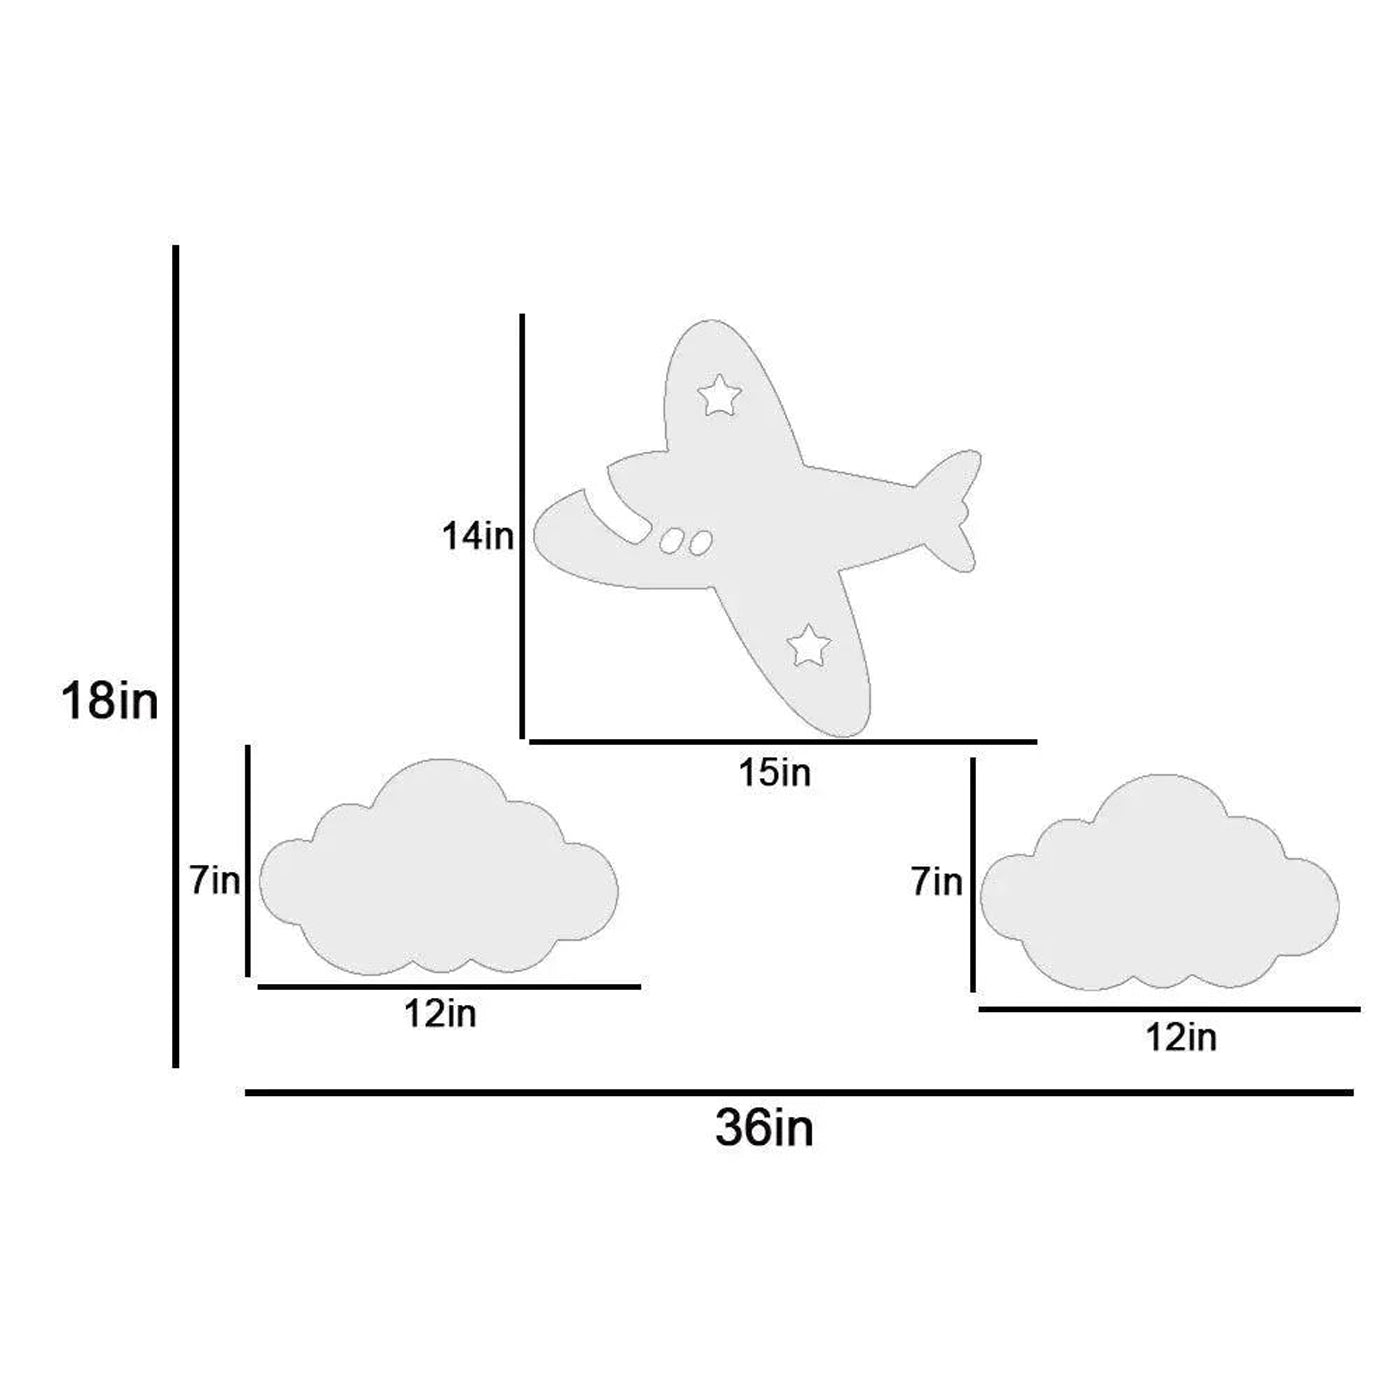 Aeroplane Flying on the Cloud Wall Lamp Wooden Creative Wall Decorative Backlit Wall Hanging Kids room décor Light for Home and Office Décor